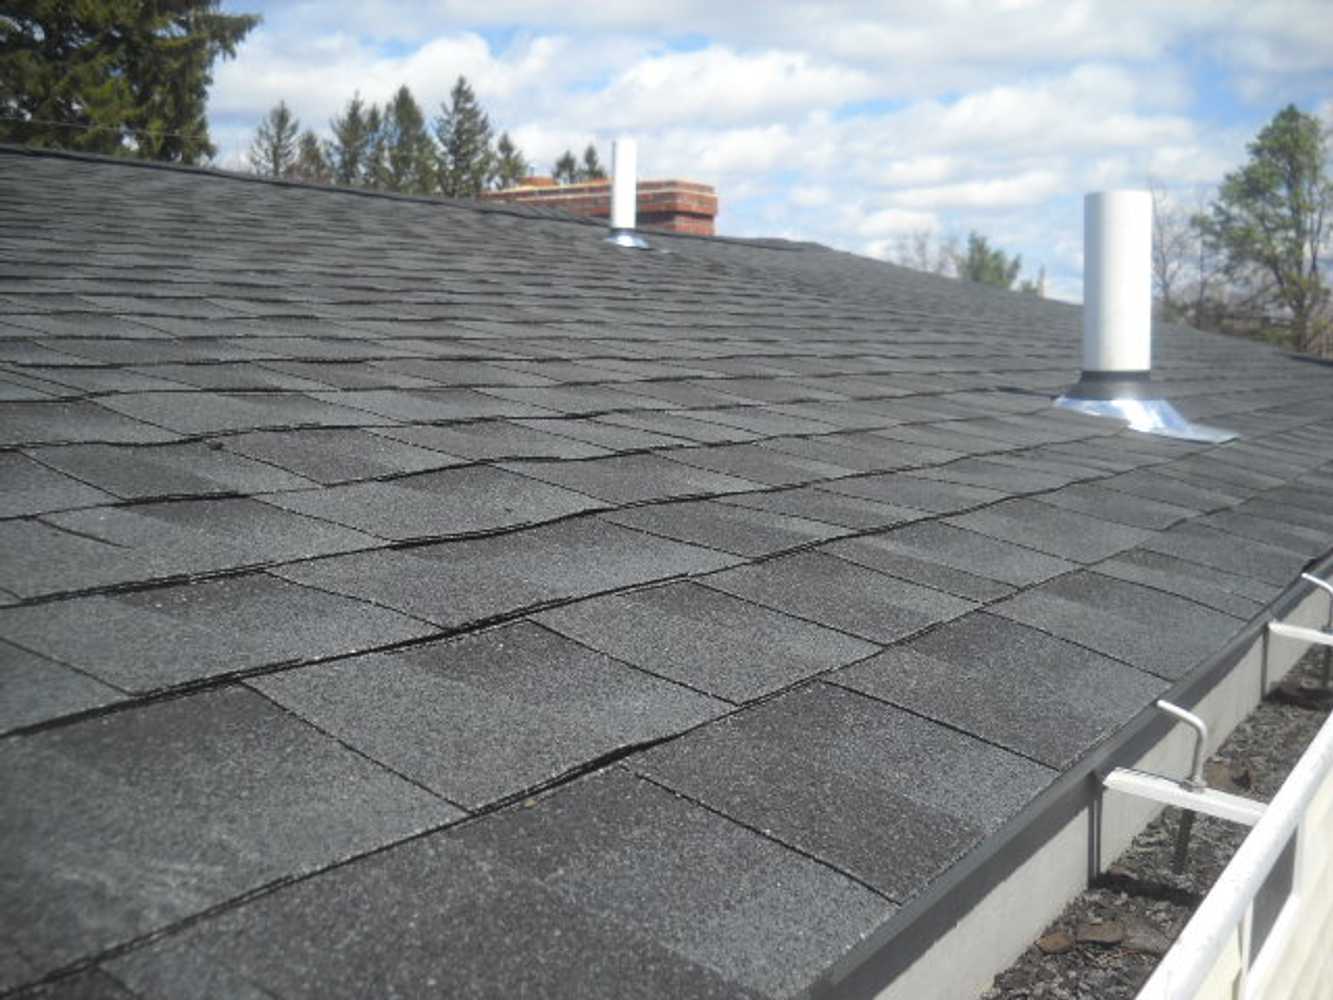 New Architectural Style Shingles Installed